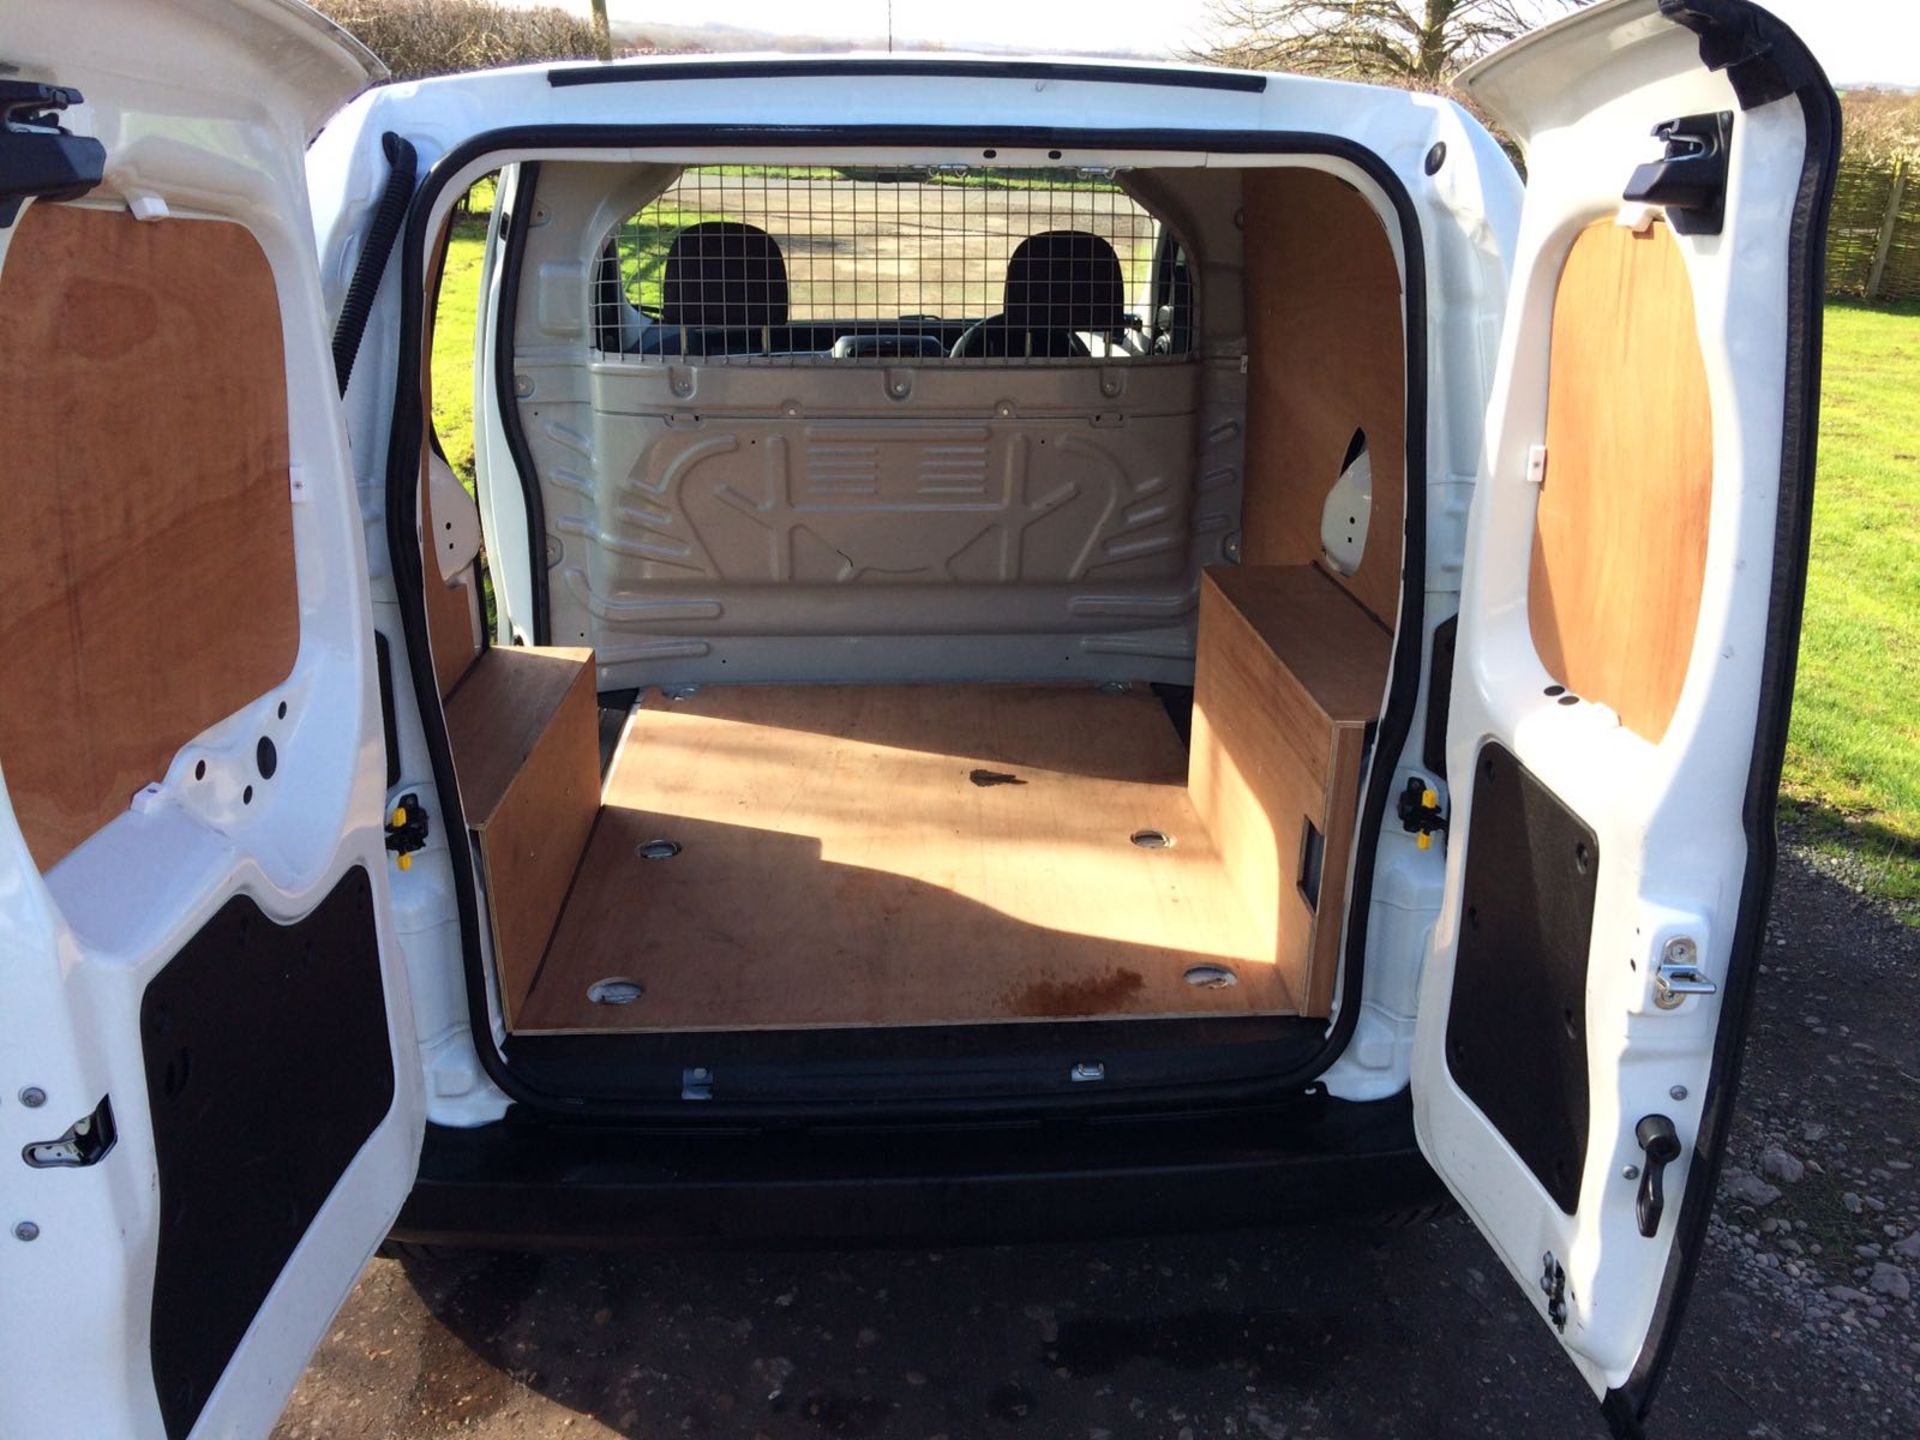 2015/65 REG PEUGEOT BIPPER PROFESSIONAL HDI, SHOWING 1 OWNER FROM NEW *PLUS VAT* - Image 9 of 18